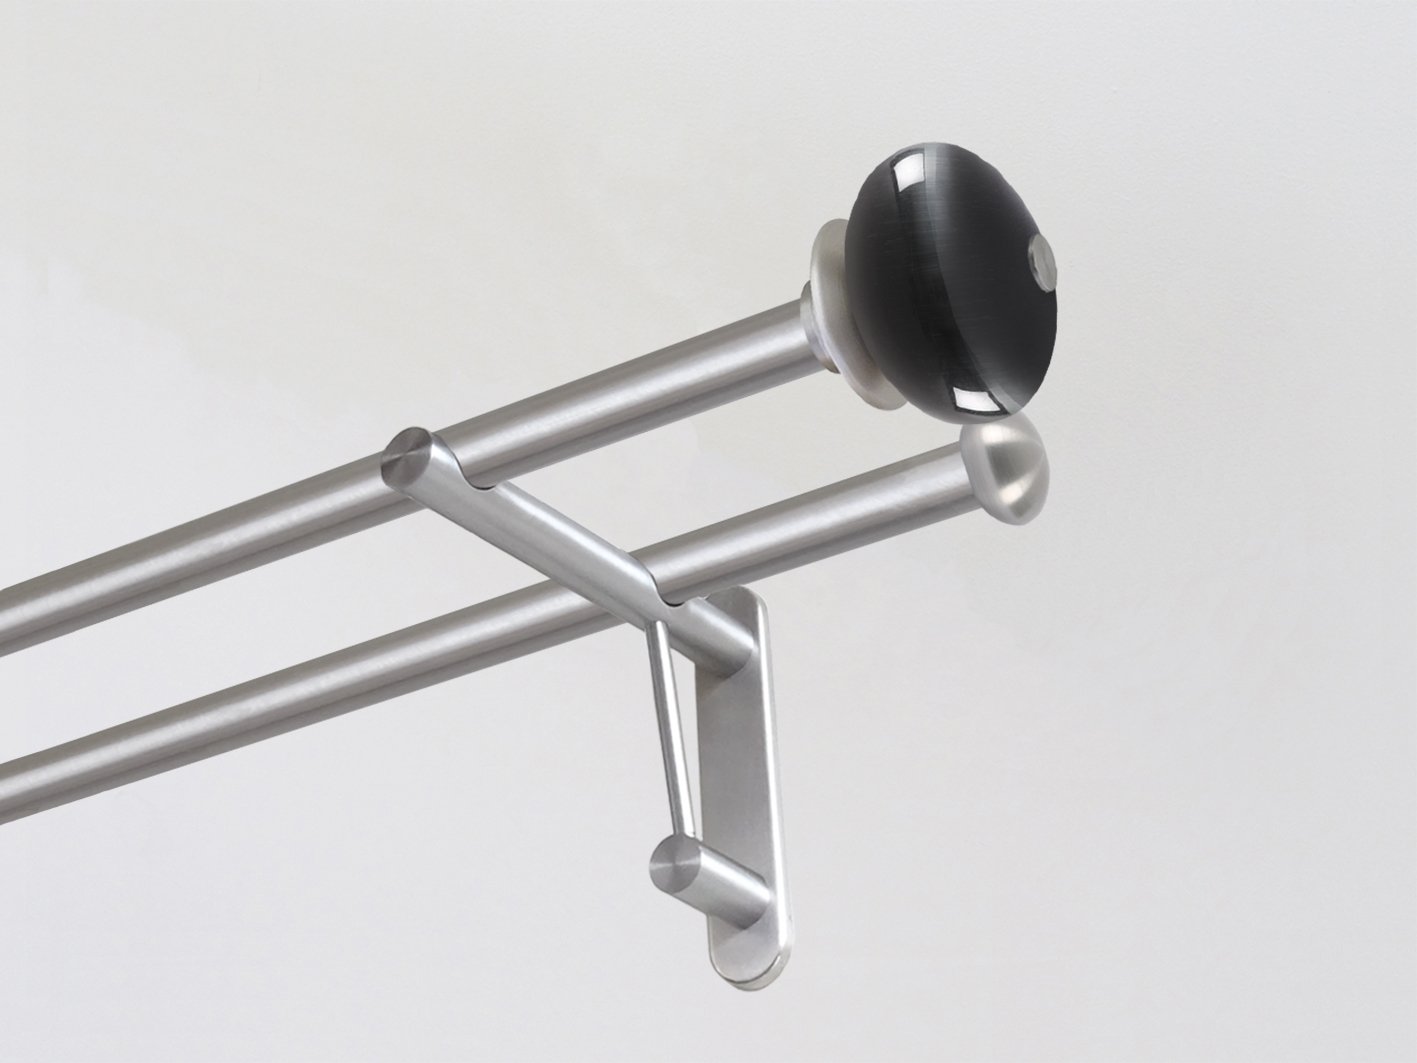 Double 19mm stainless steel curtain pole duo system set with glass moonstone finials in graphite